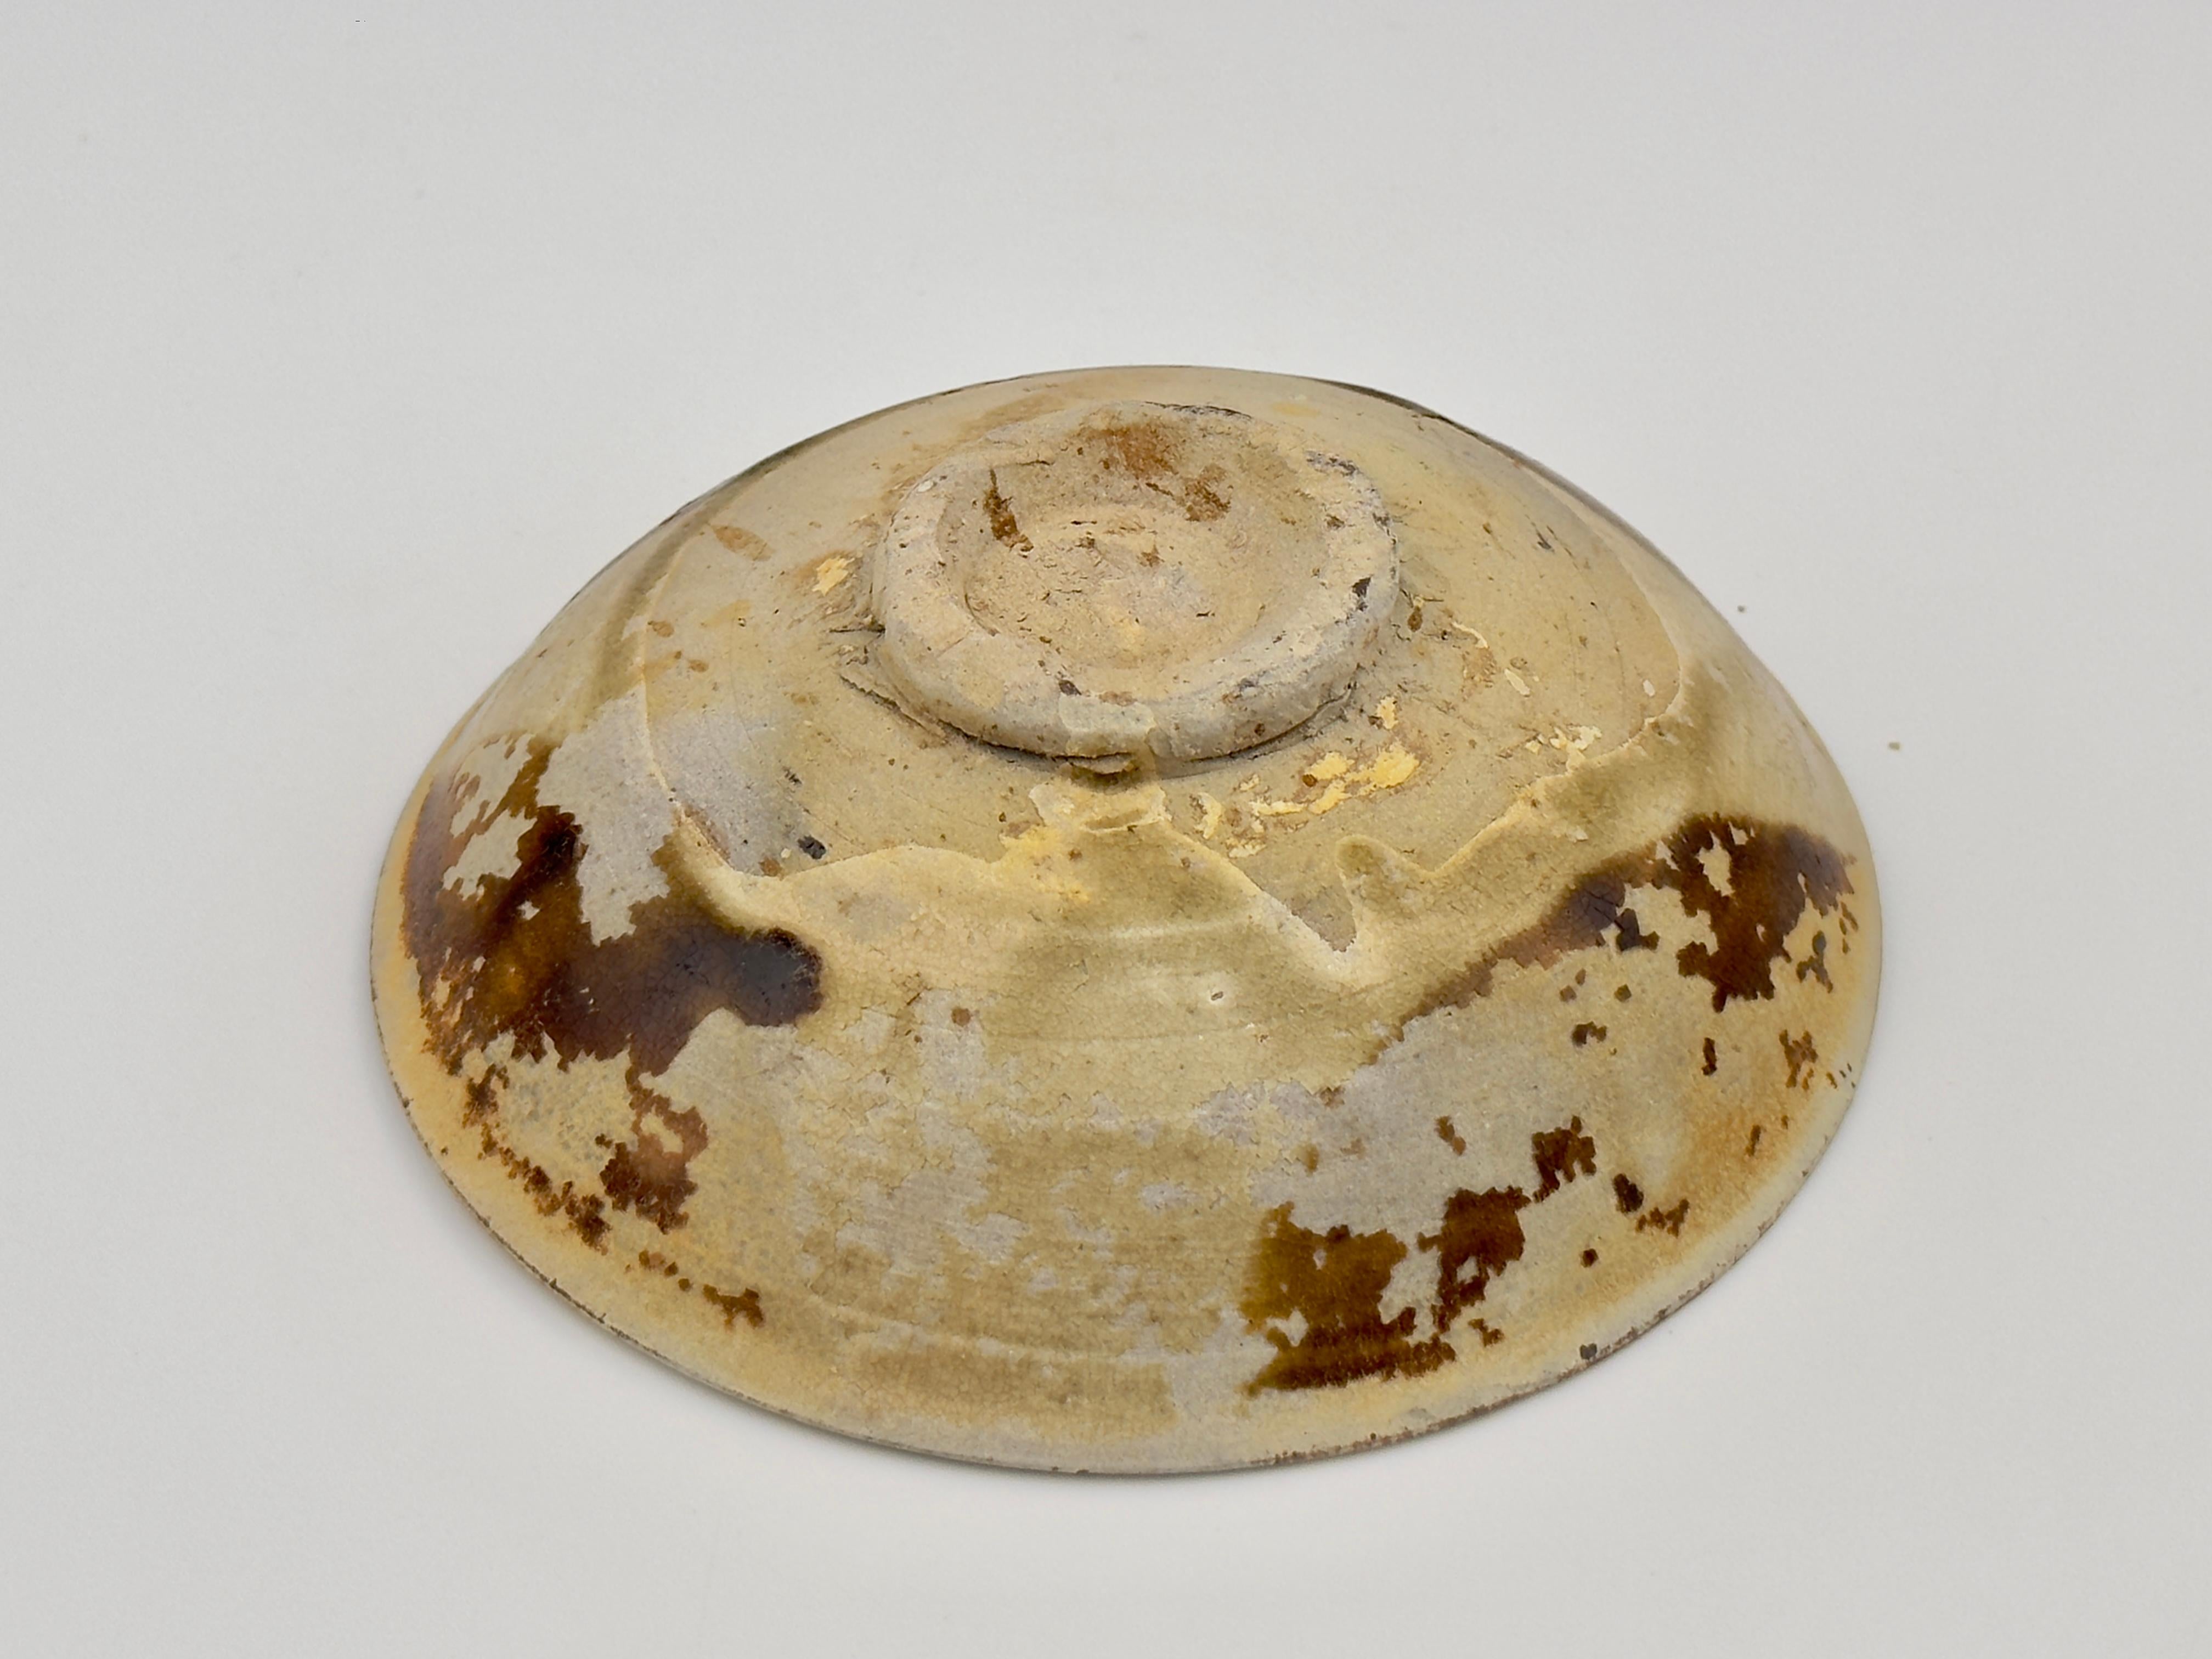 Stoneware Changsha bowl with abstract pattern presumed to be Islamic symbols, Tang Dynasty For Sale